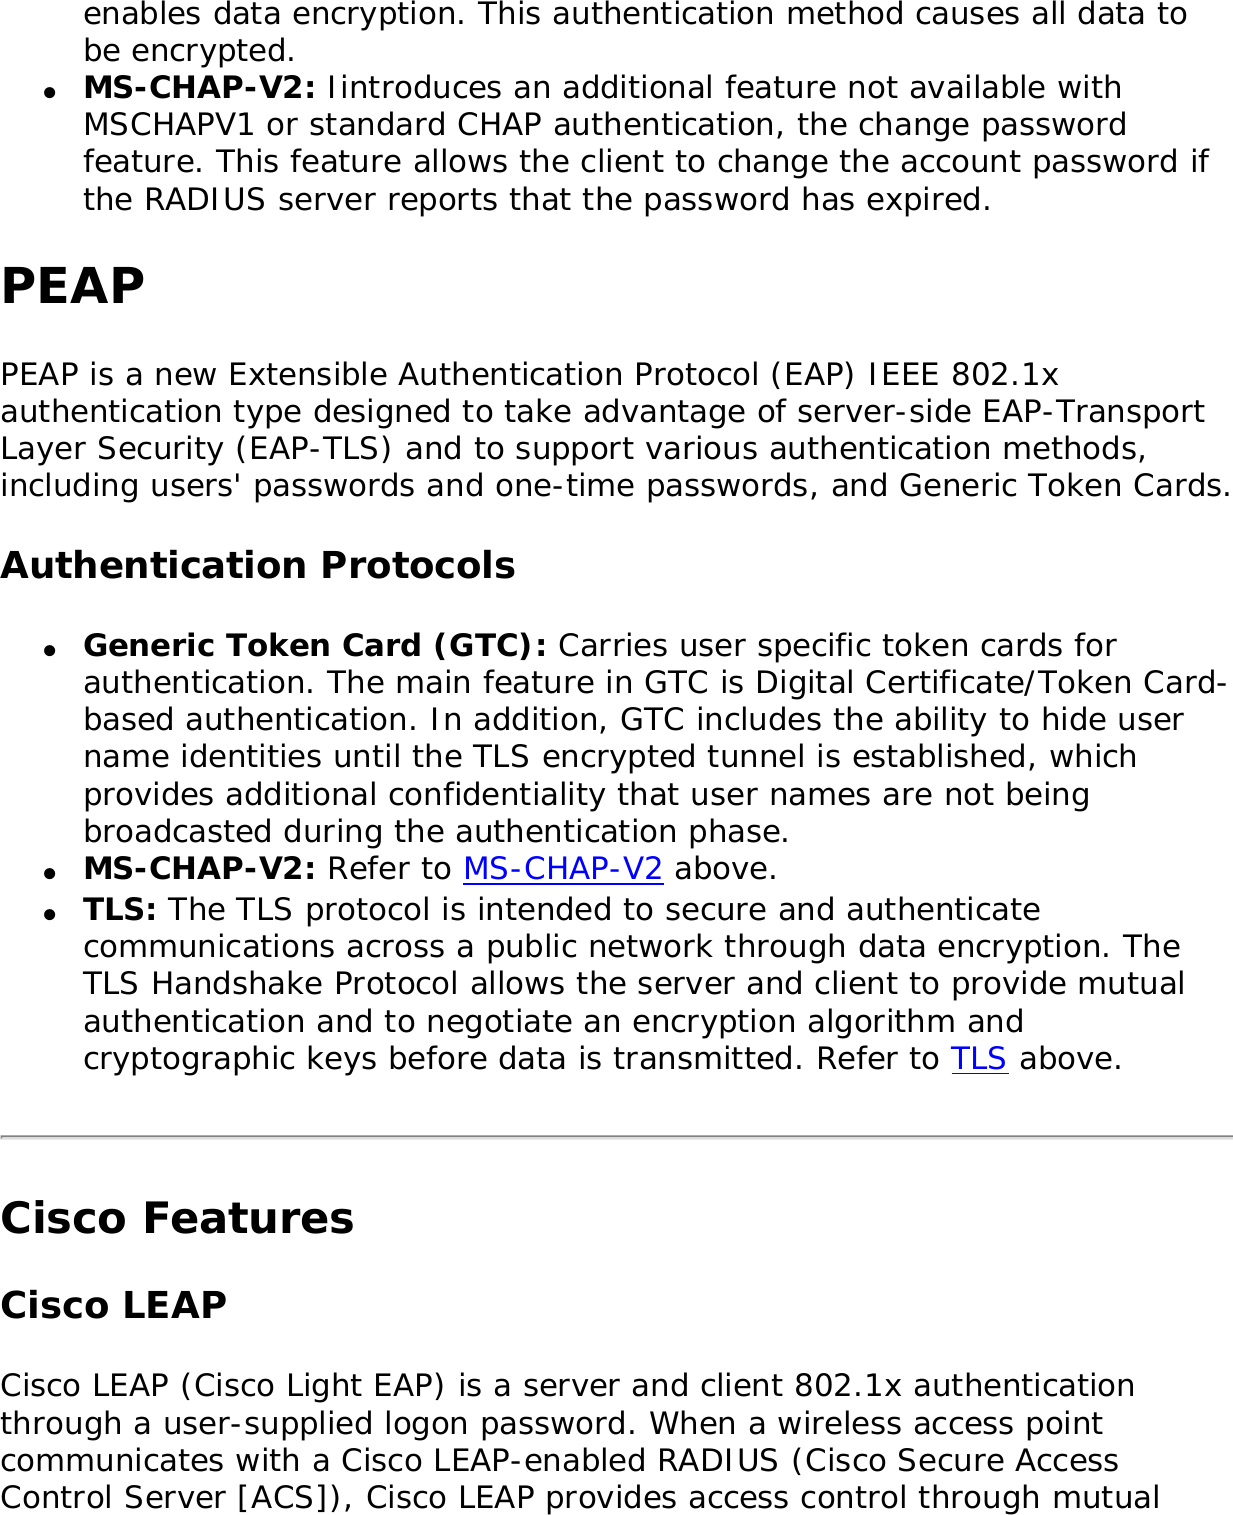 enables data encryption. This authentication method causes all data to be encrypted.●     MS-CHAP-V2: Iintroduces an additional feature not available with MSCHAPV1 or standard CHAP authentication, the change password feature. This feature allows the client to change the account password if the RADIUS server reports that the password has expired. PEAPPEAP is a new Extensible Authentication Protocol (EAP) IEEE 802.1x authentication type designed to take advantage of server-side EAP-Transport Layer Security (EAP-TLS) and to support various authentication methods, including users&apos; passwords and one-time passwords, and Generic Token Cards. Authentication Protocols●     Generic Token Card (GTC): Carries user specific token cards for authentication. The main feature in GTC is Digital Certificate/Token Card-based authentication. In addition, GTC includes the ability to hide user name identities until the TLS encrypted tunnel is established, which provides additional confidentiality that user names are not being broadcasted during the authentication phase. ●     MS-CHAP-V2: Refer to MS-CHAP-V2 above. ●     TLS: The TLS protocol is intended to secure and authenticate communications across a public network through data encryption. The TLS Handshake Protocol allows the server and client to provide mutual authentication and to negotiate an encryption algorithm and cryptographic keys before data is transmitted. Refer to TLS above. Cisco FeaturesCisco LEAP Cisco LEAP (Cisco Light EAP) is a server and client 802.1x authentication through a user-supplied logon password. When a wireless access point communicates with a Cisco LEAP-enabled RADIUS (Cisco Secure Access Control Server [ACS]), Cisco LEAP provides access control through mutual 